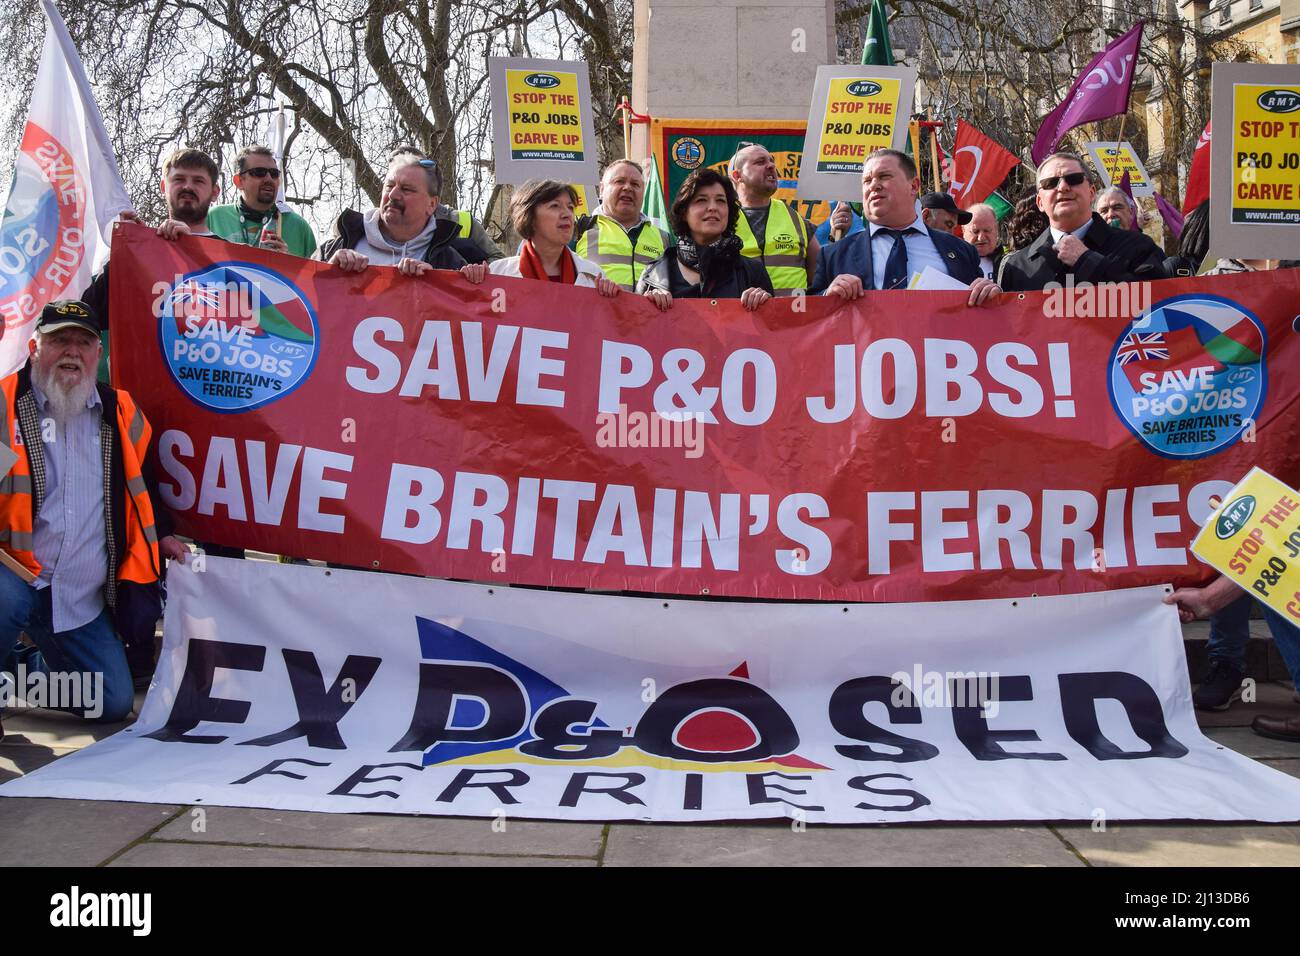 London, UK. 21st March 2022. Protesters outside the Parliament. P&O Ferries staff and RMT Union members marched from the headquarters of DP World, the company which owns P&O, to Parliament, after 800 UK staff were fired and replaced by agency workers. Stock Photo